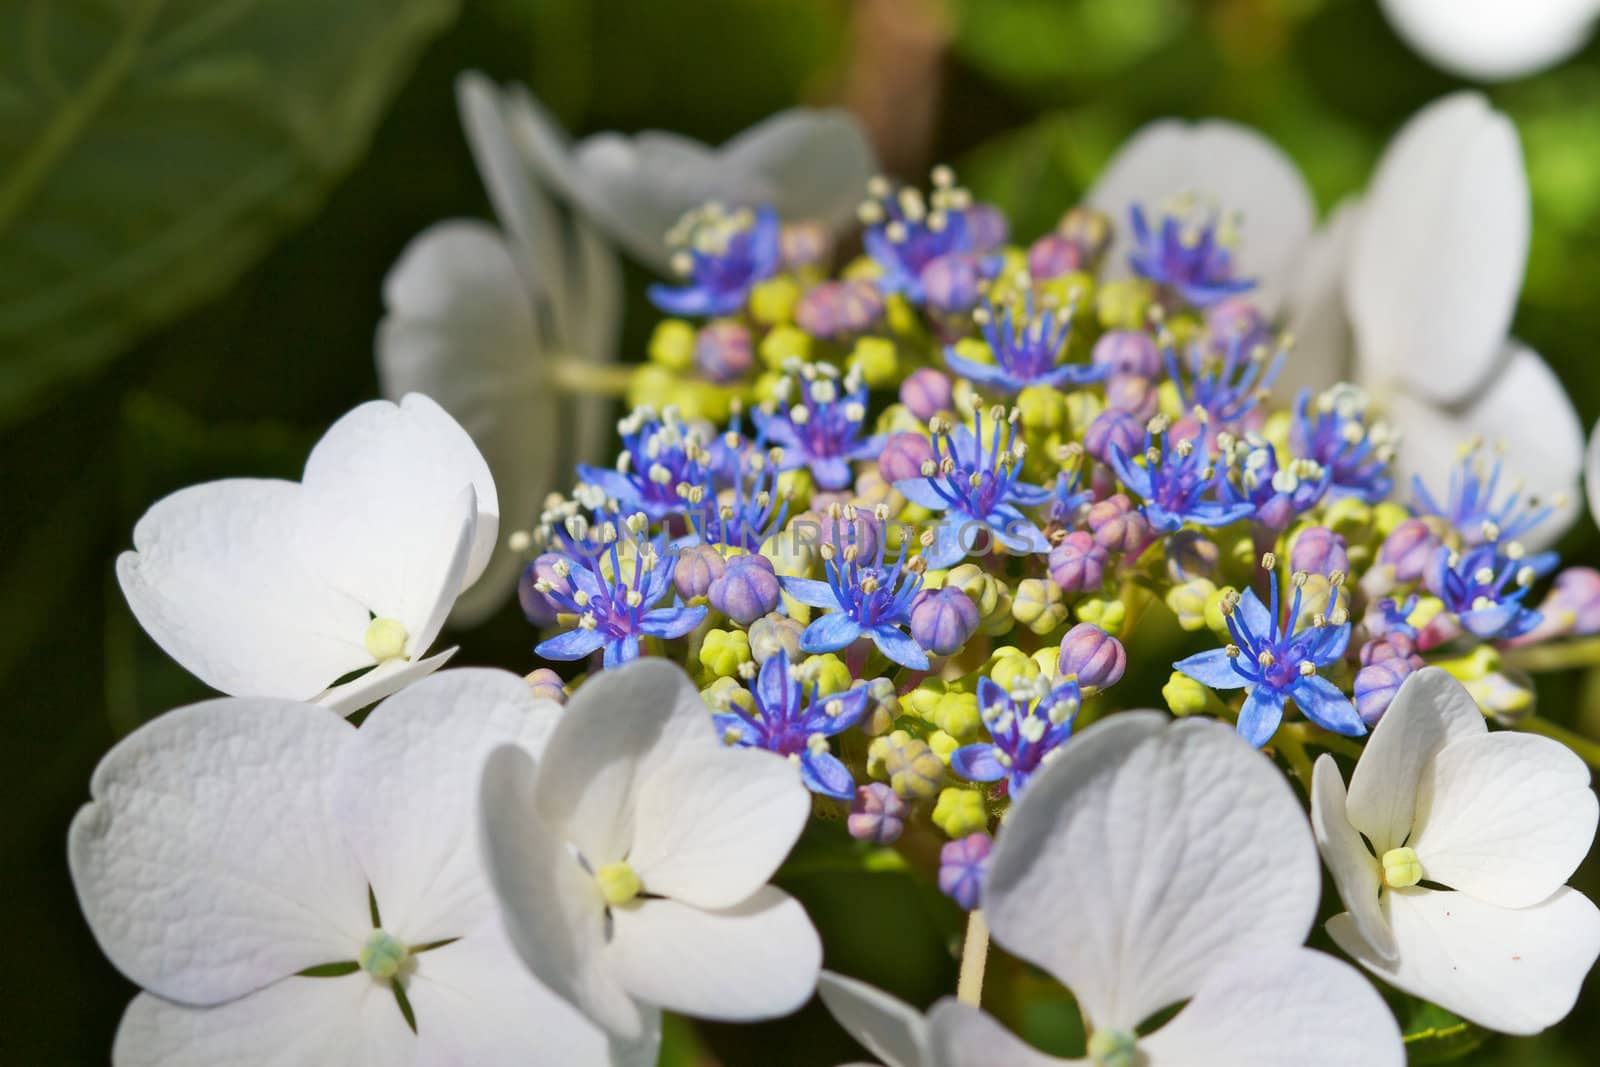 Macro of very white large Hydrangea blooms with tiny green, violet, purple, and blue flowers